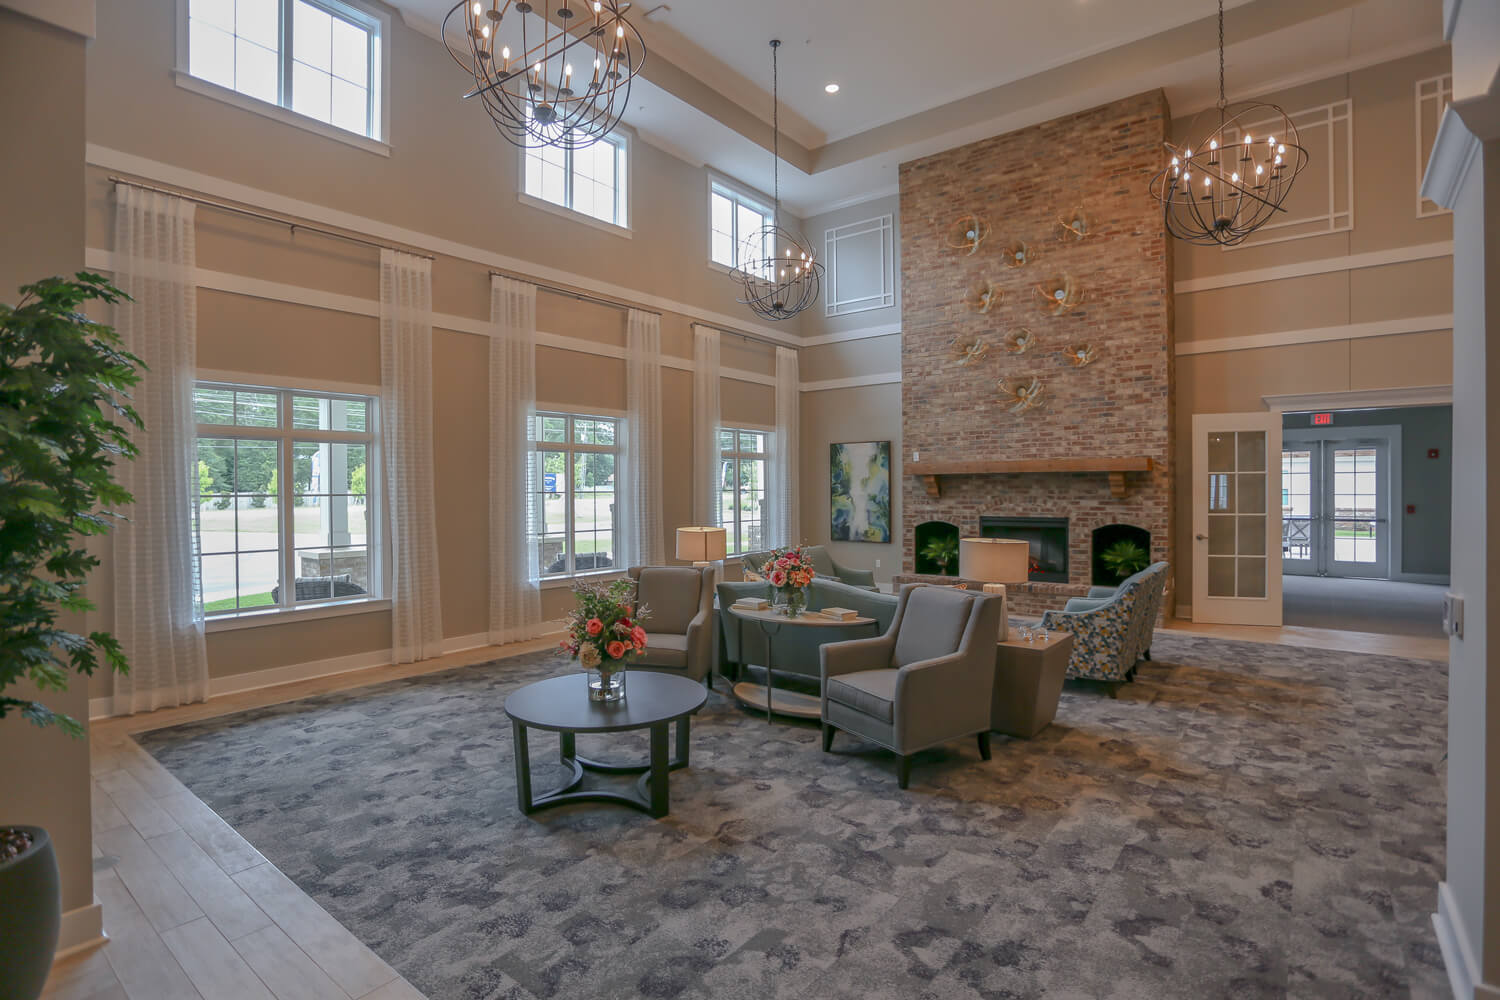 Grand South Senior Living - Fireplace - Designed by Foshee Architecture